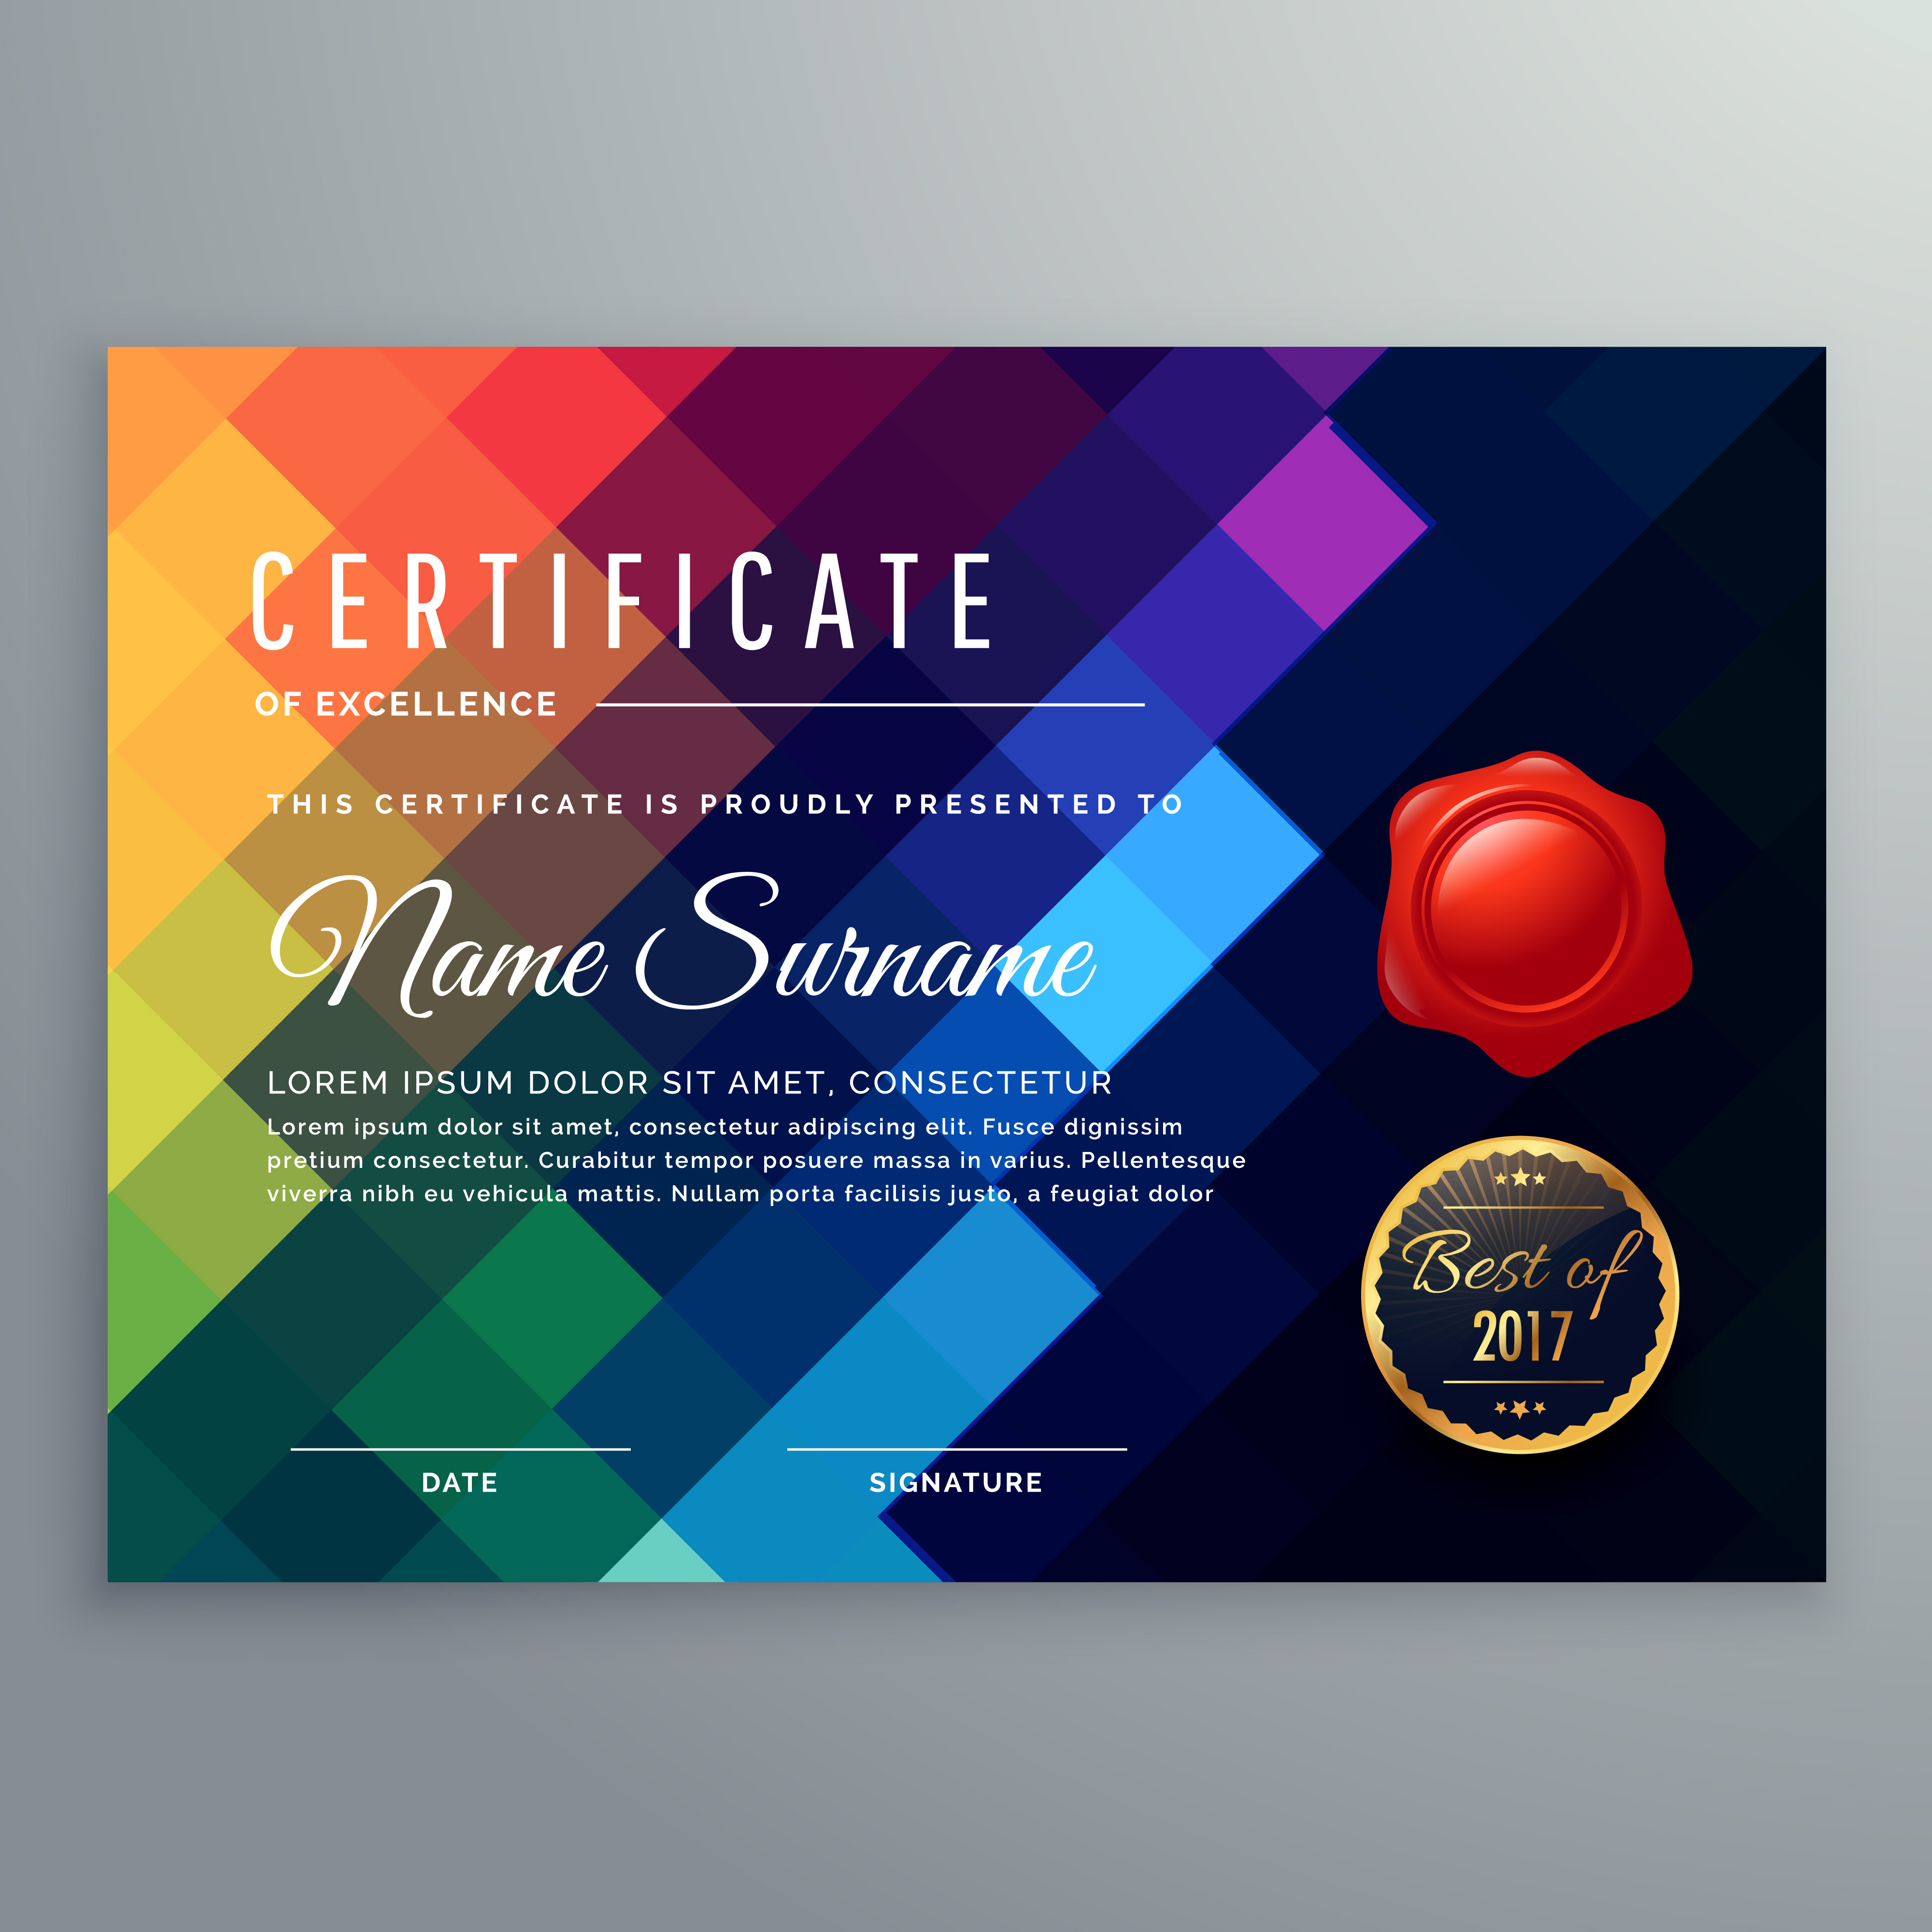 Download dark certificate design with colorful mosaic shapes - Download Free Vector Art, Stock Graphics ...